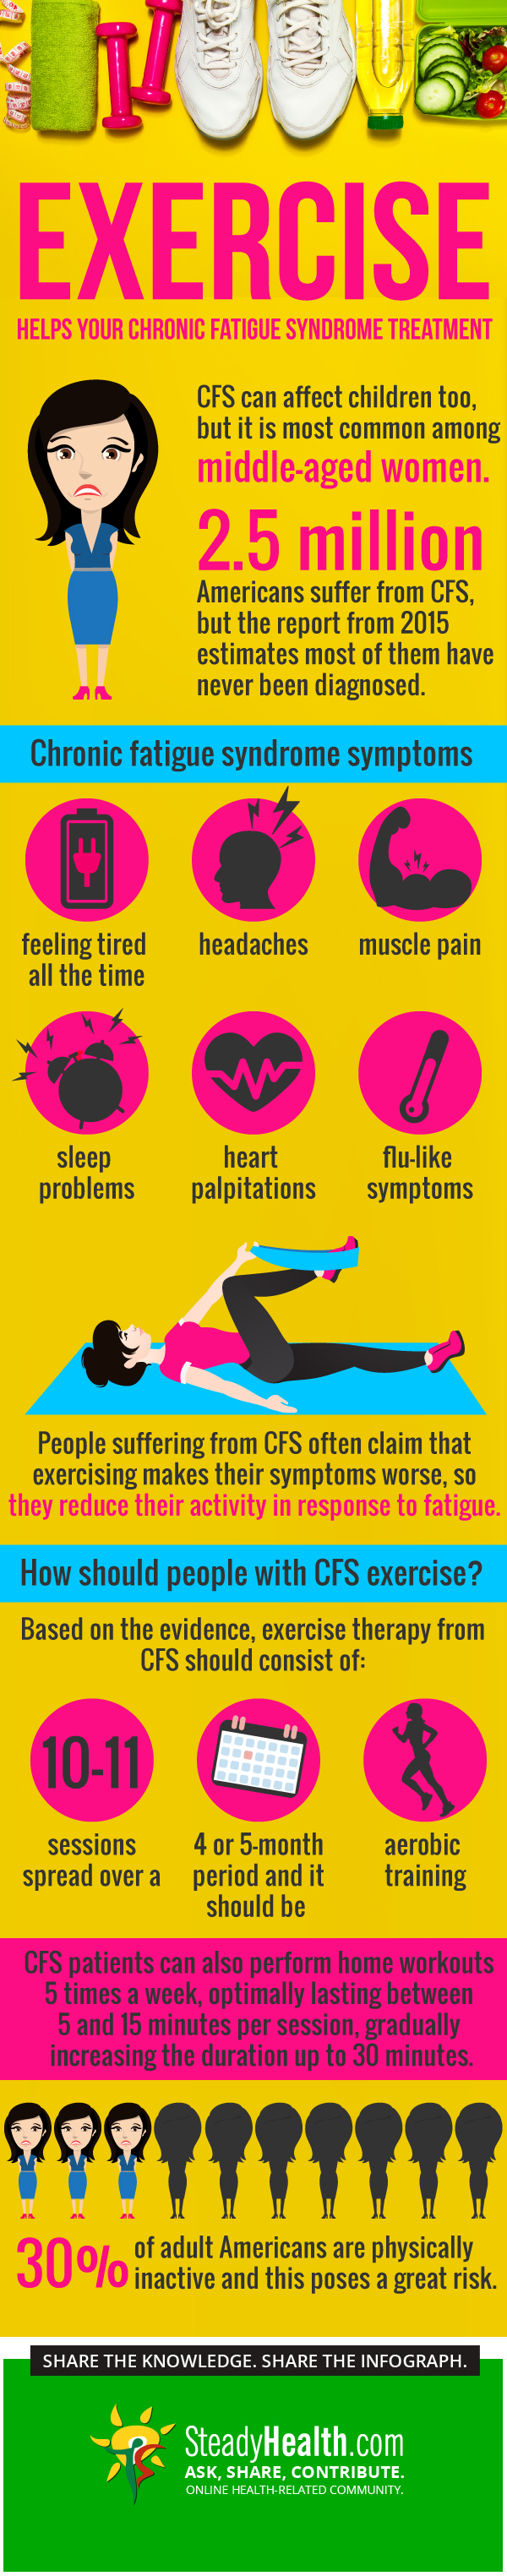 Sweat-Your-Tiredness-Away-Why-Exercise-May-Help-Your-Chronic-Fatigue-Syndrome-Treatment-infographic.jpg